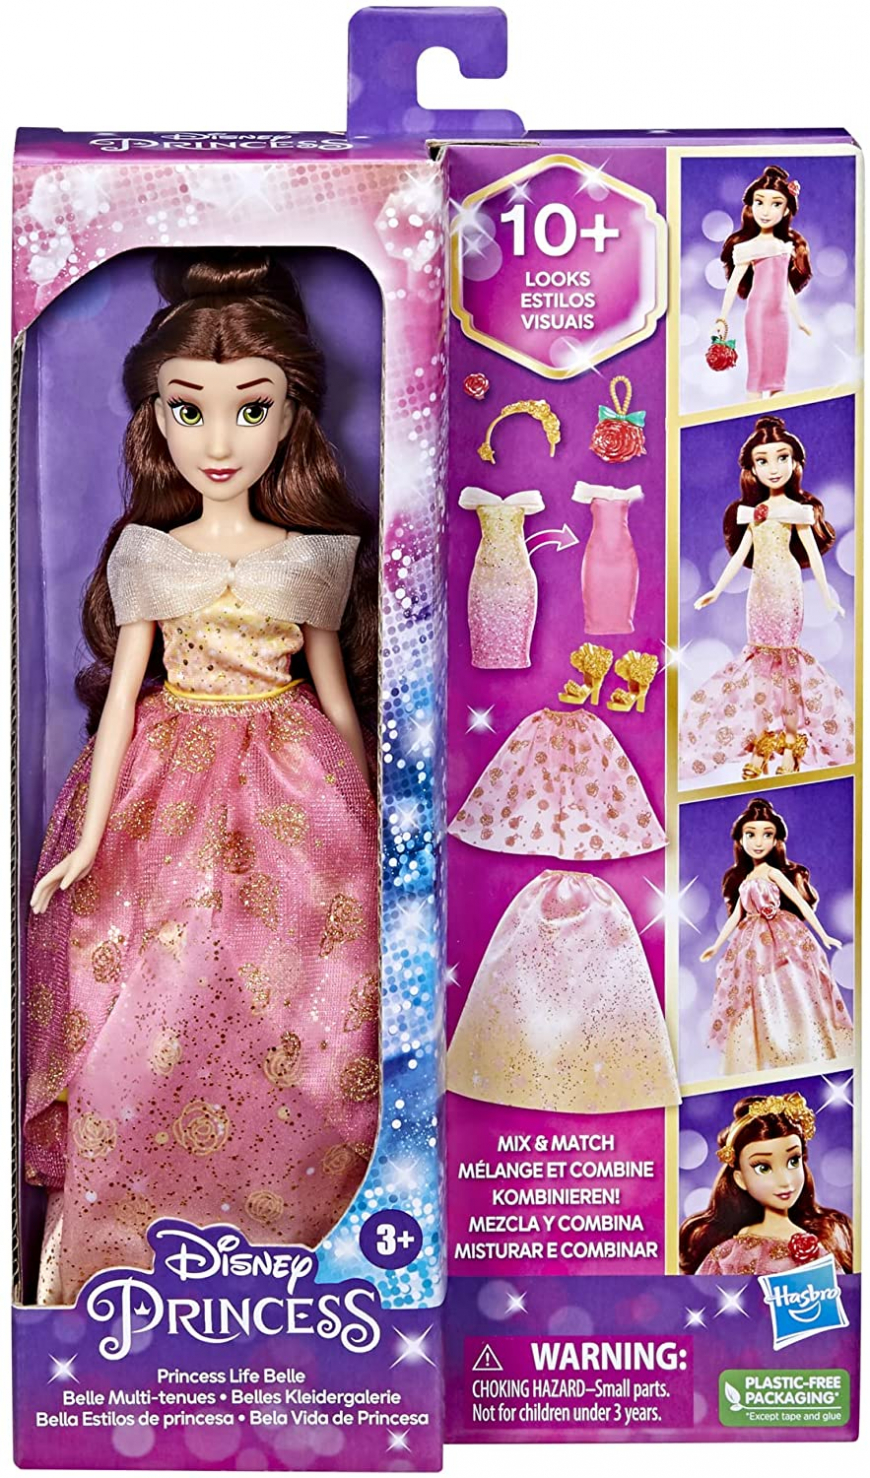 Disney Princess Life Belle with mix and match outfits